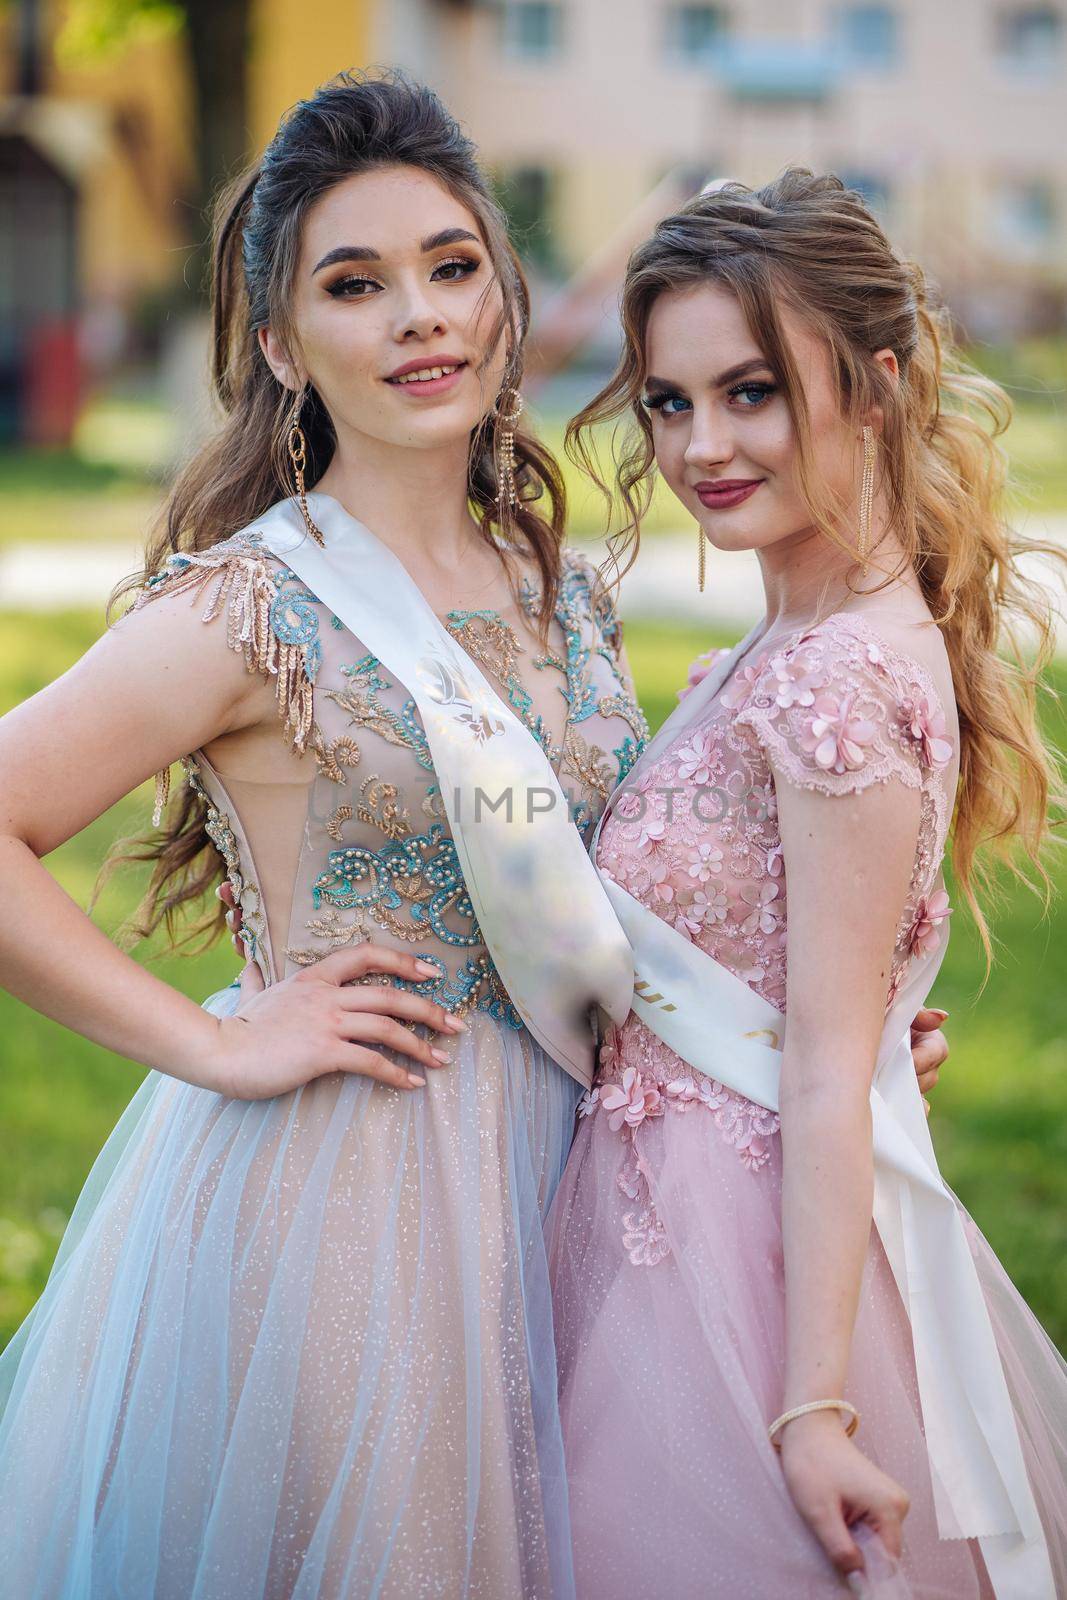 Beautiful schoolgirls in dress at the prom at school. by DovidPro